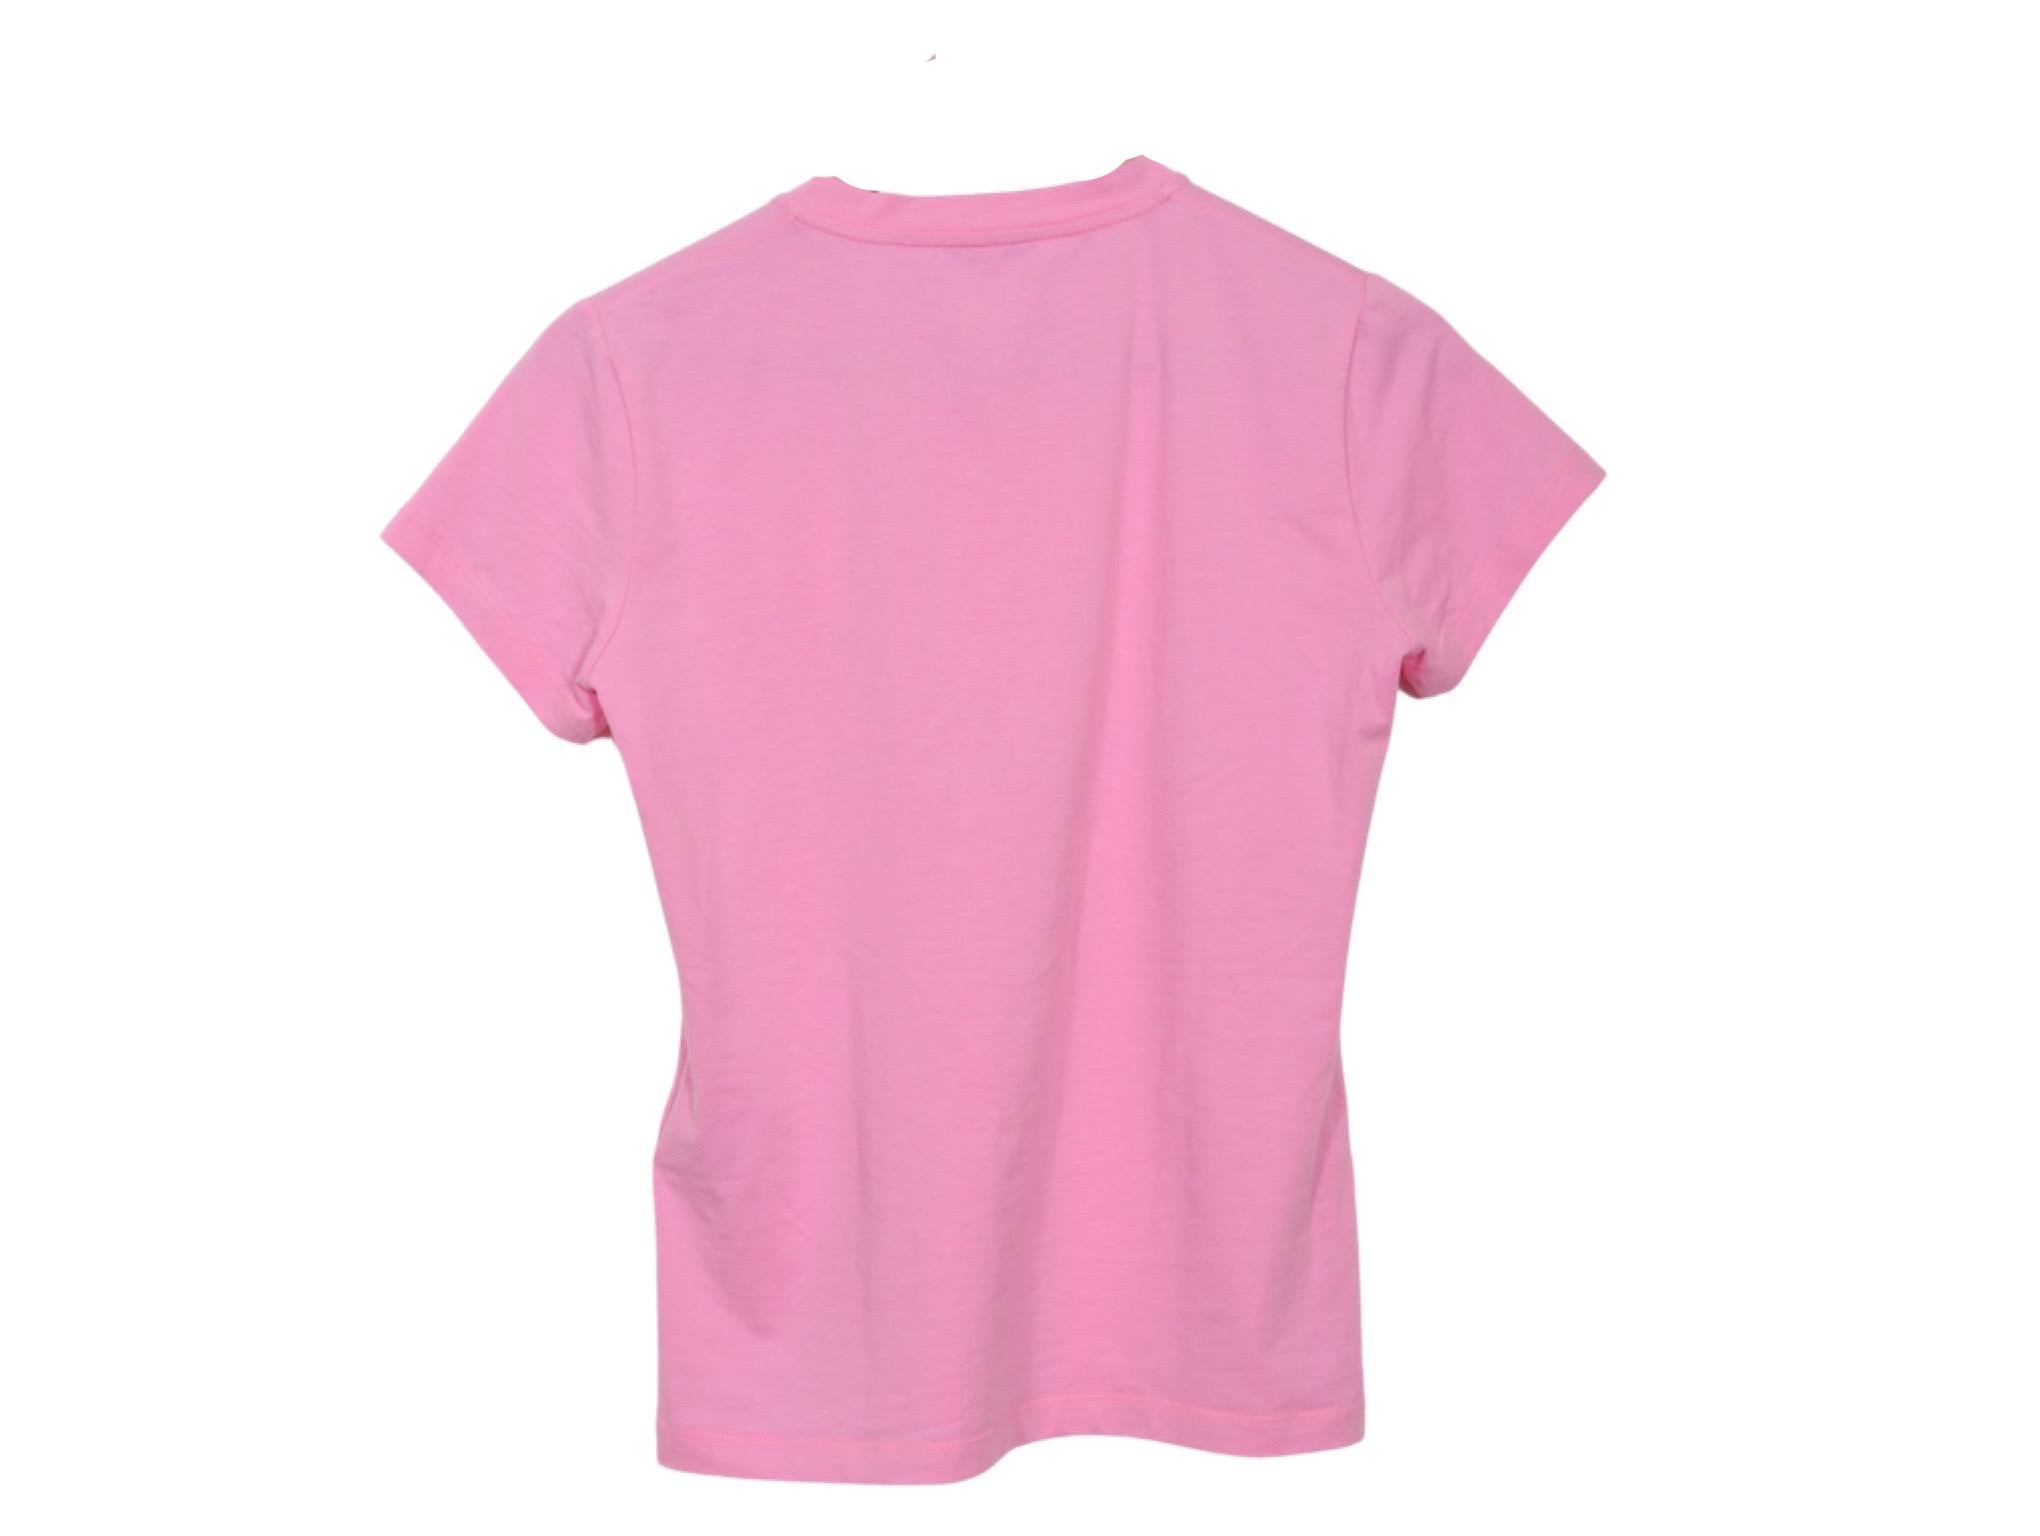 VERSACE SHORT SLEEVE T-SHIRT Pink In Excellent Condition For Sale In London, GB